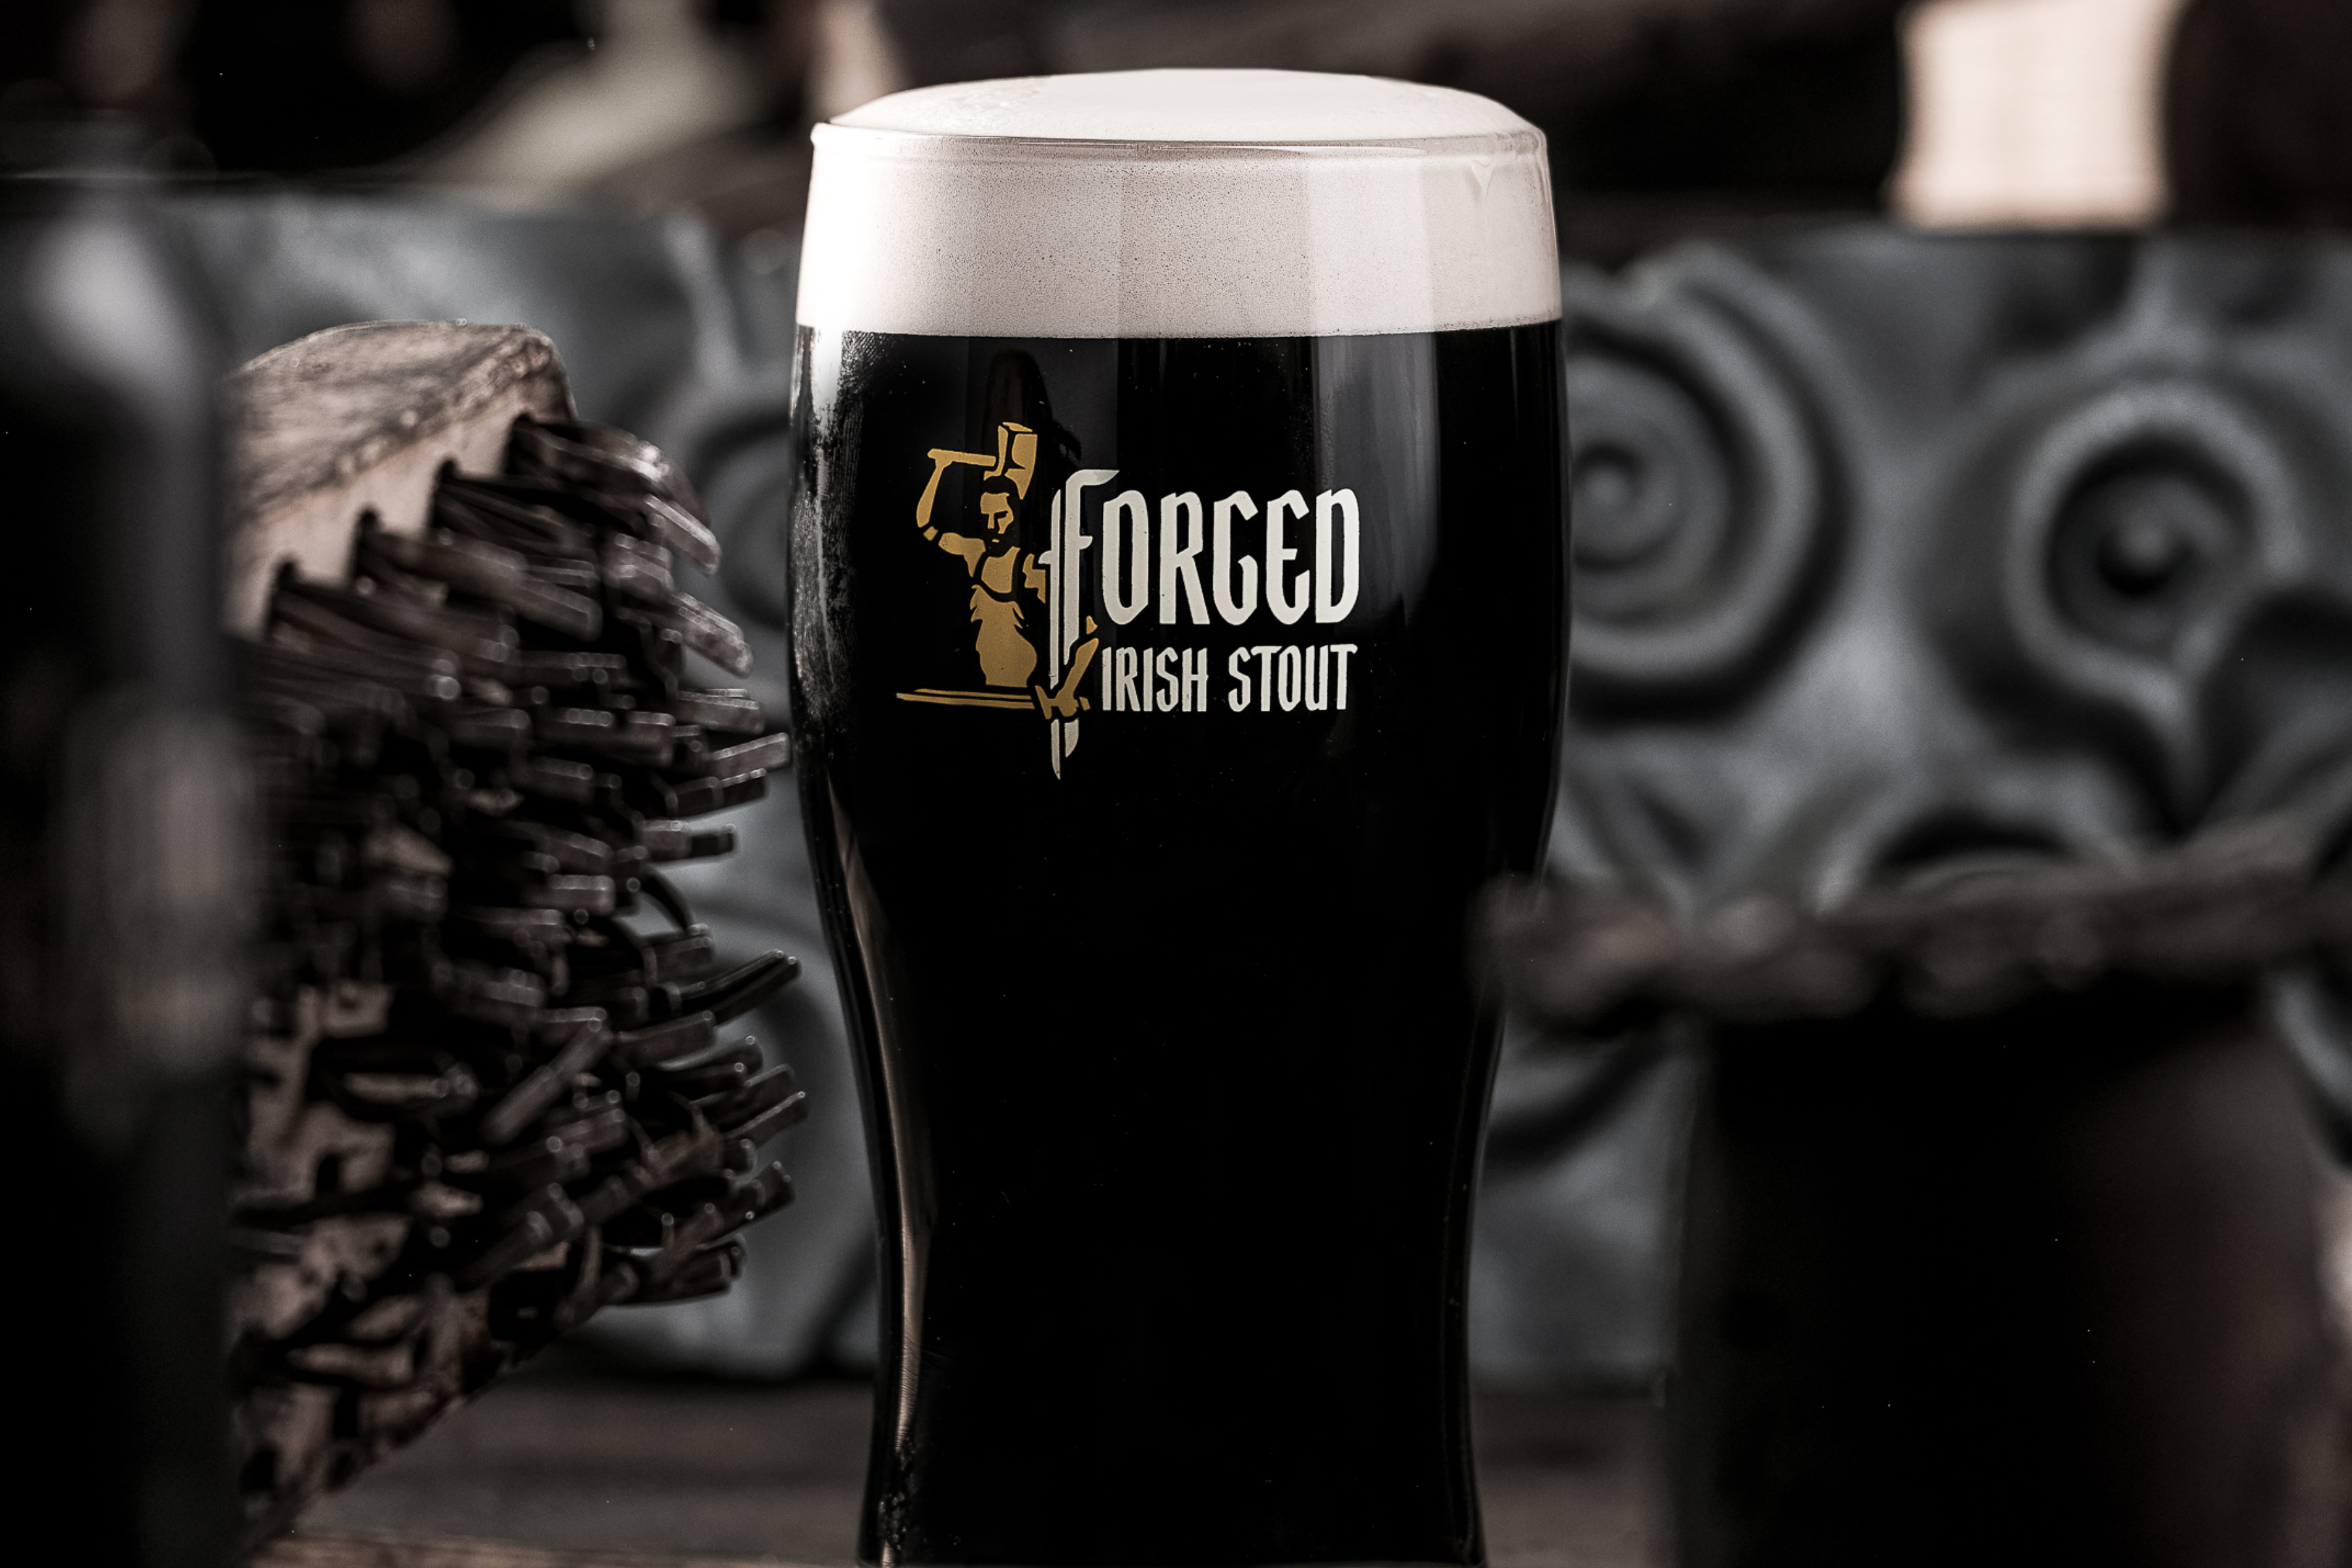 LWC Drinks Set to Bring ‘Forged’ Irish Stout to UK On-Trade Under Exclusive Distribution Partnership